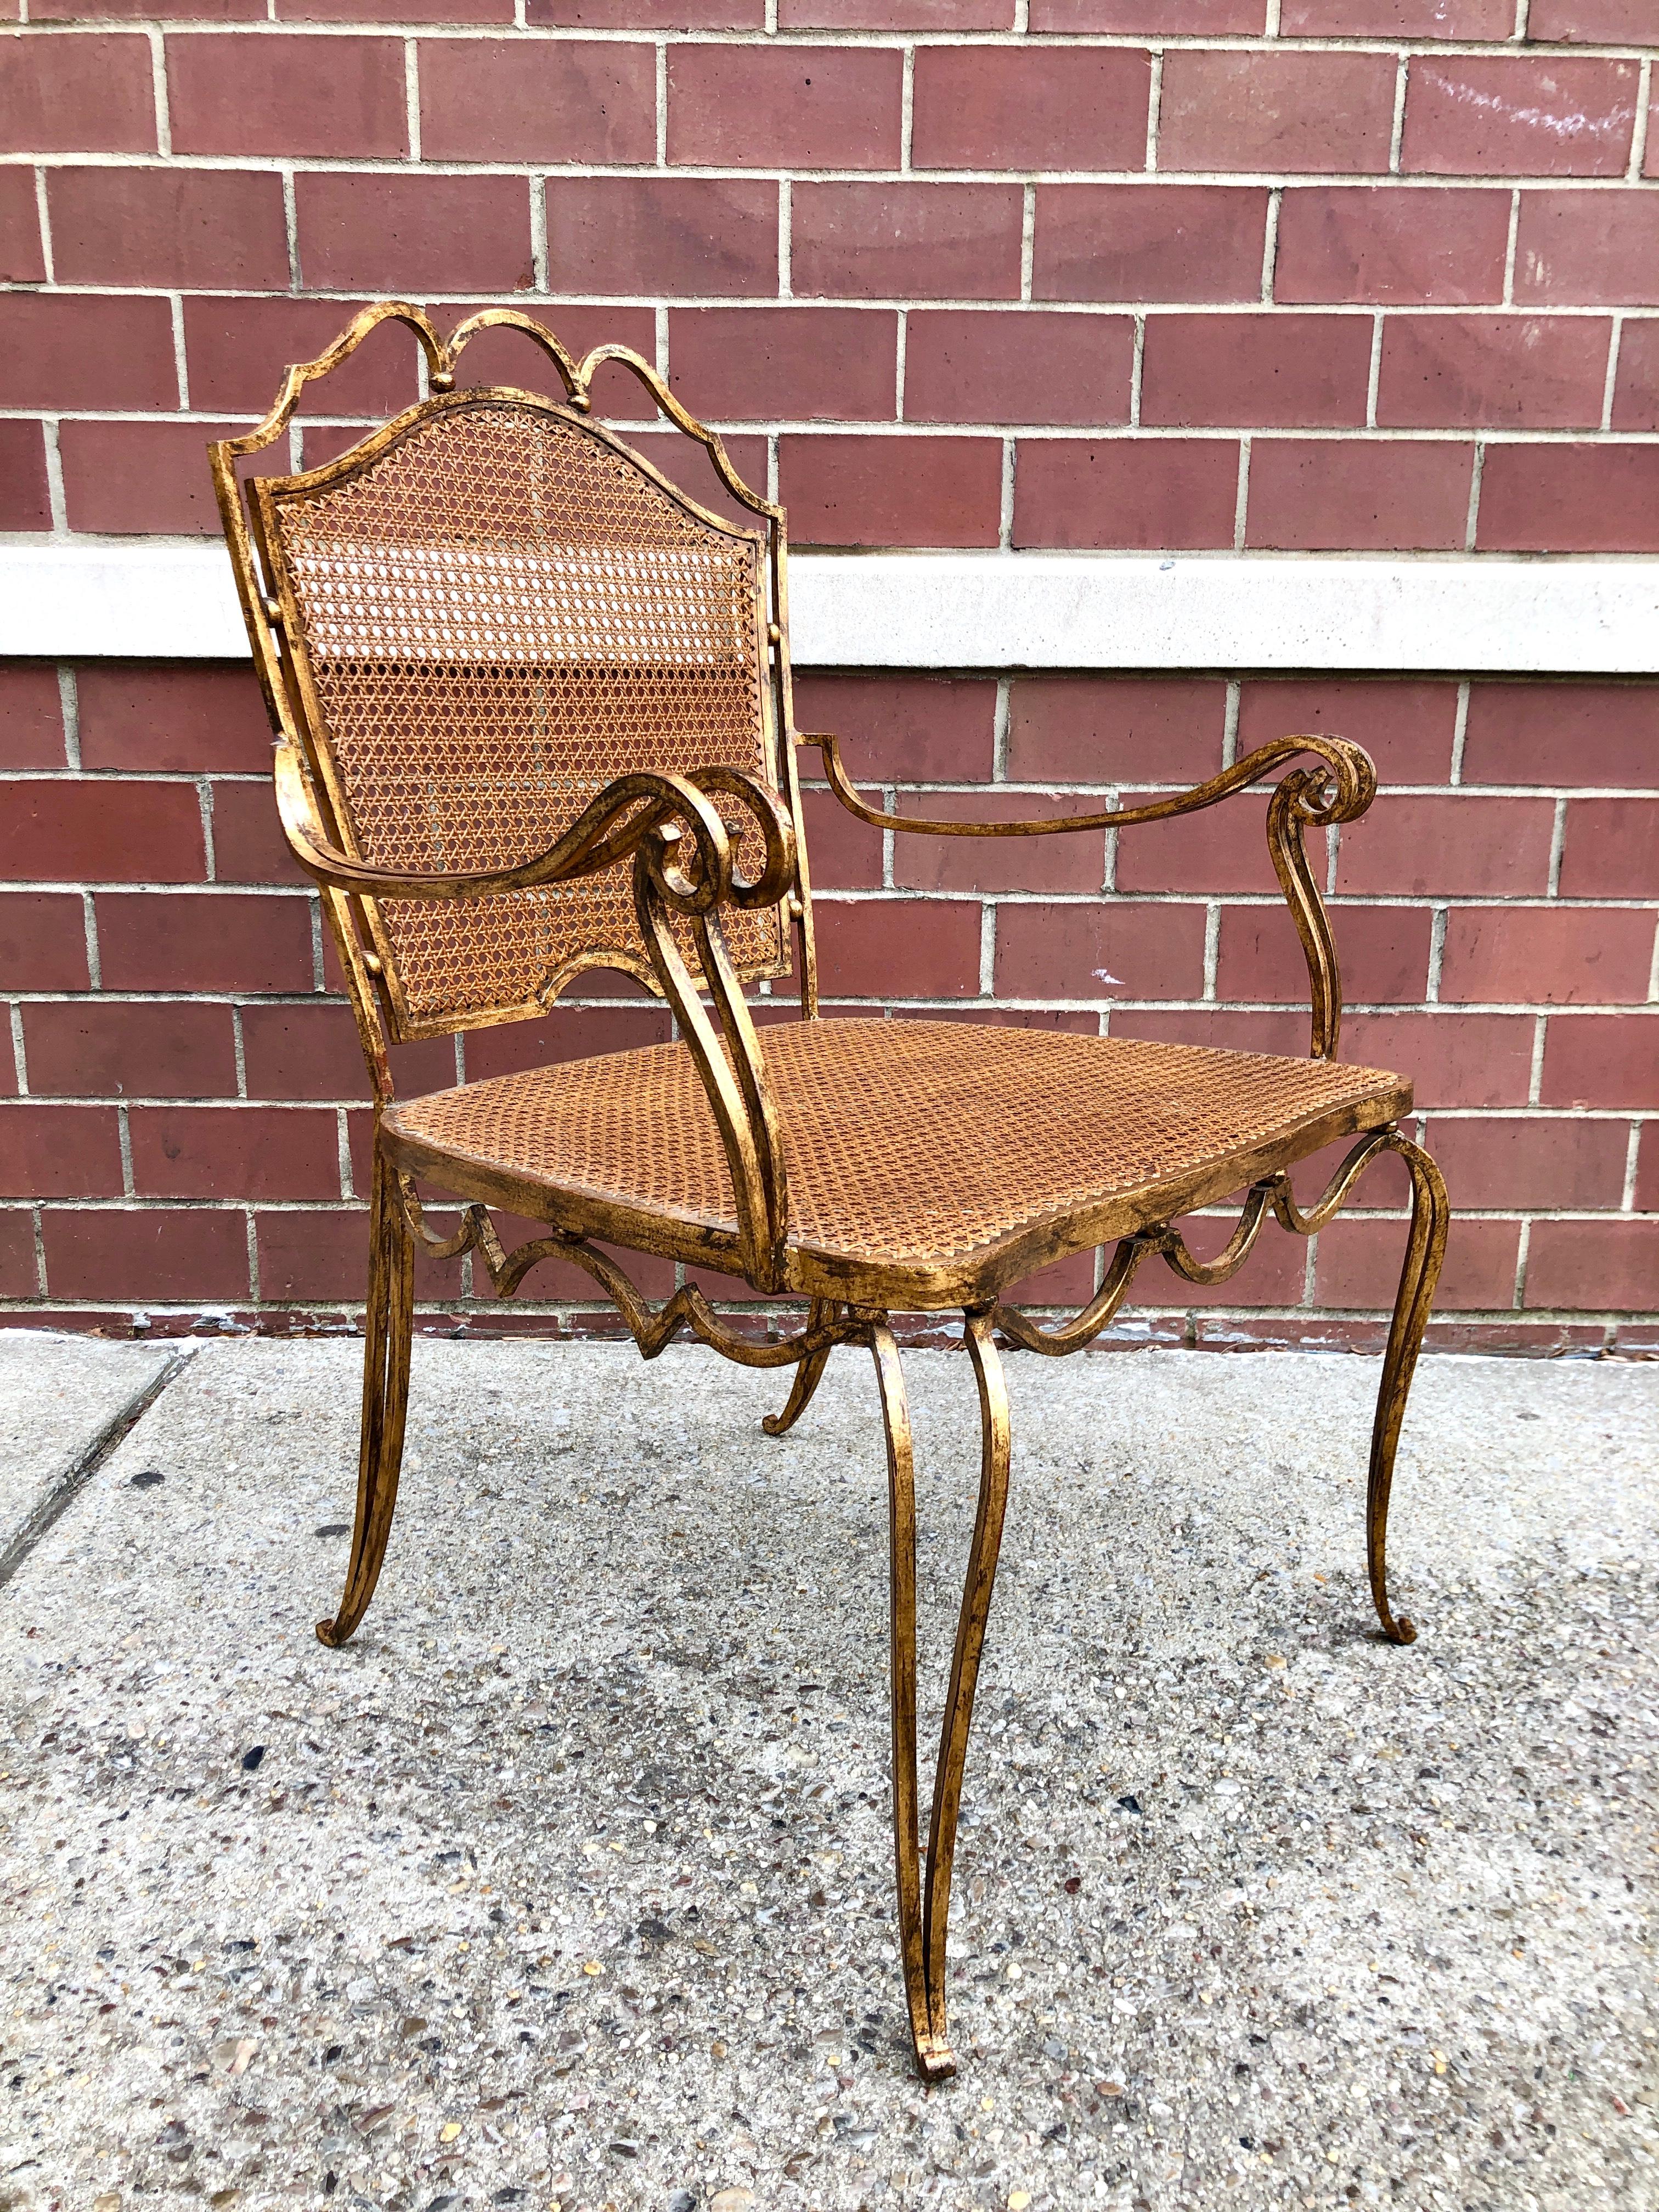 Late 1940s, Mexico, with fancifully scrolling metalwork and hand caned seat and back. An elegant and versatile design.